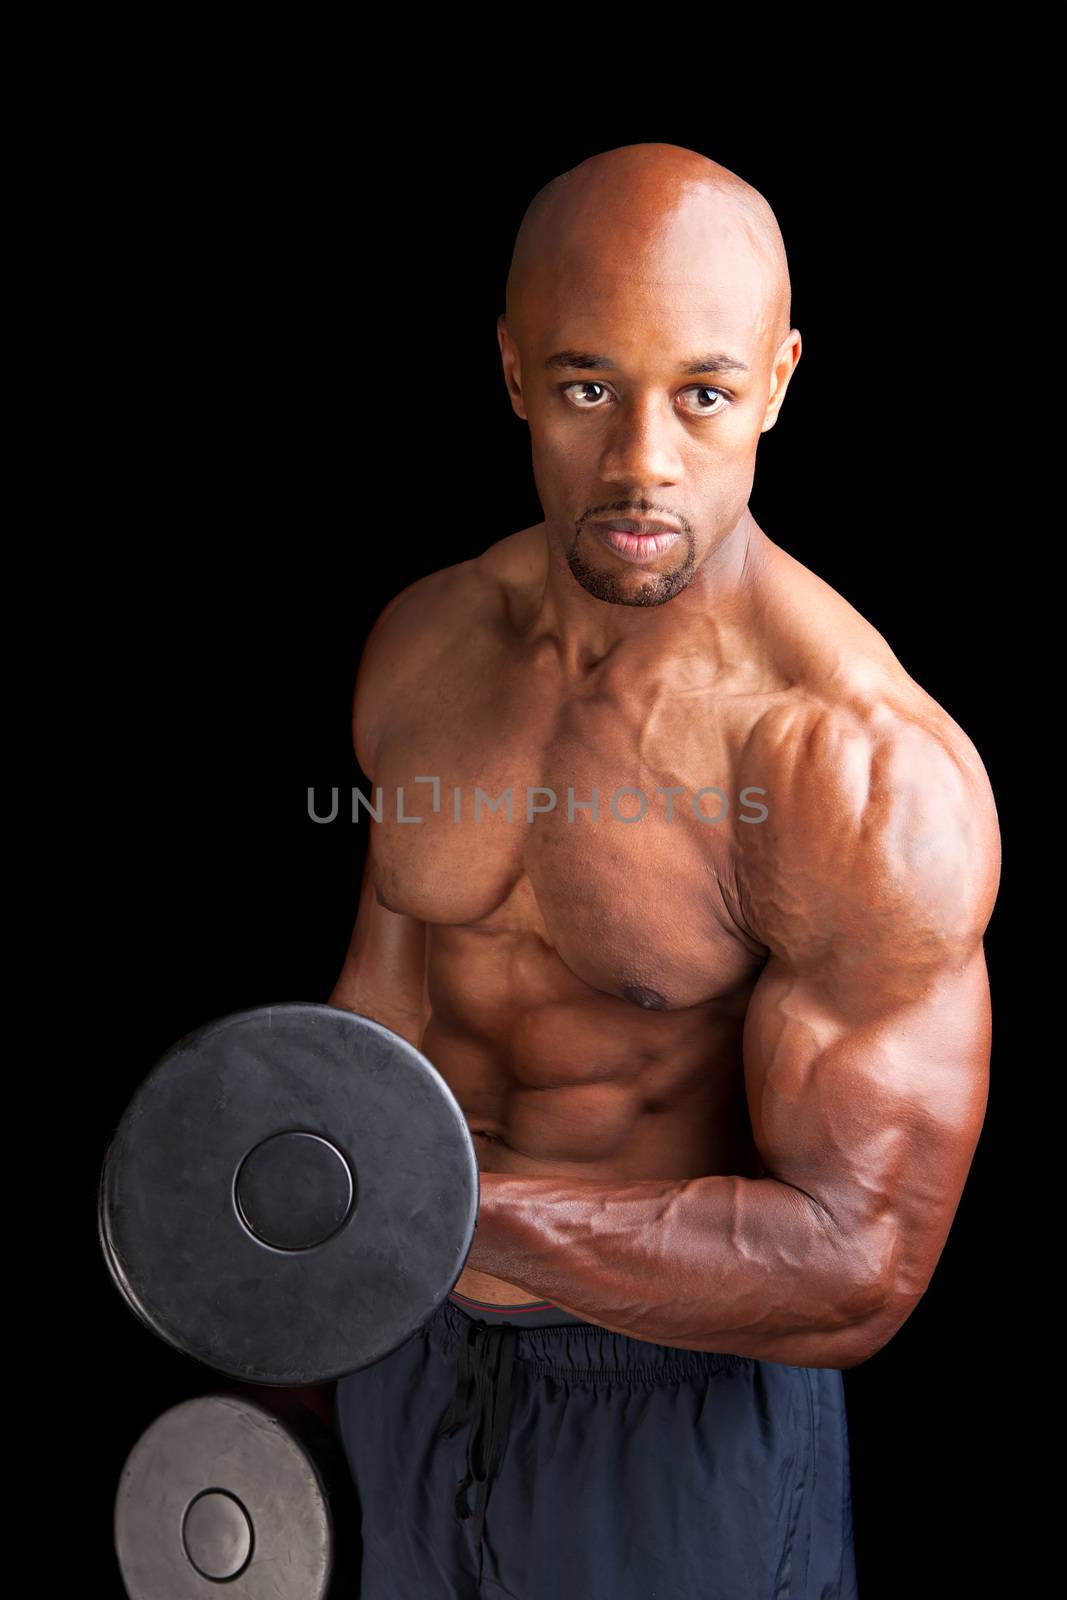 Toned and ripped lean muscle fitness man lifting weights on a curling bar.